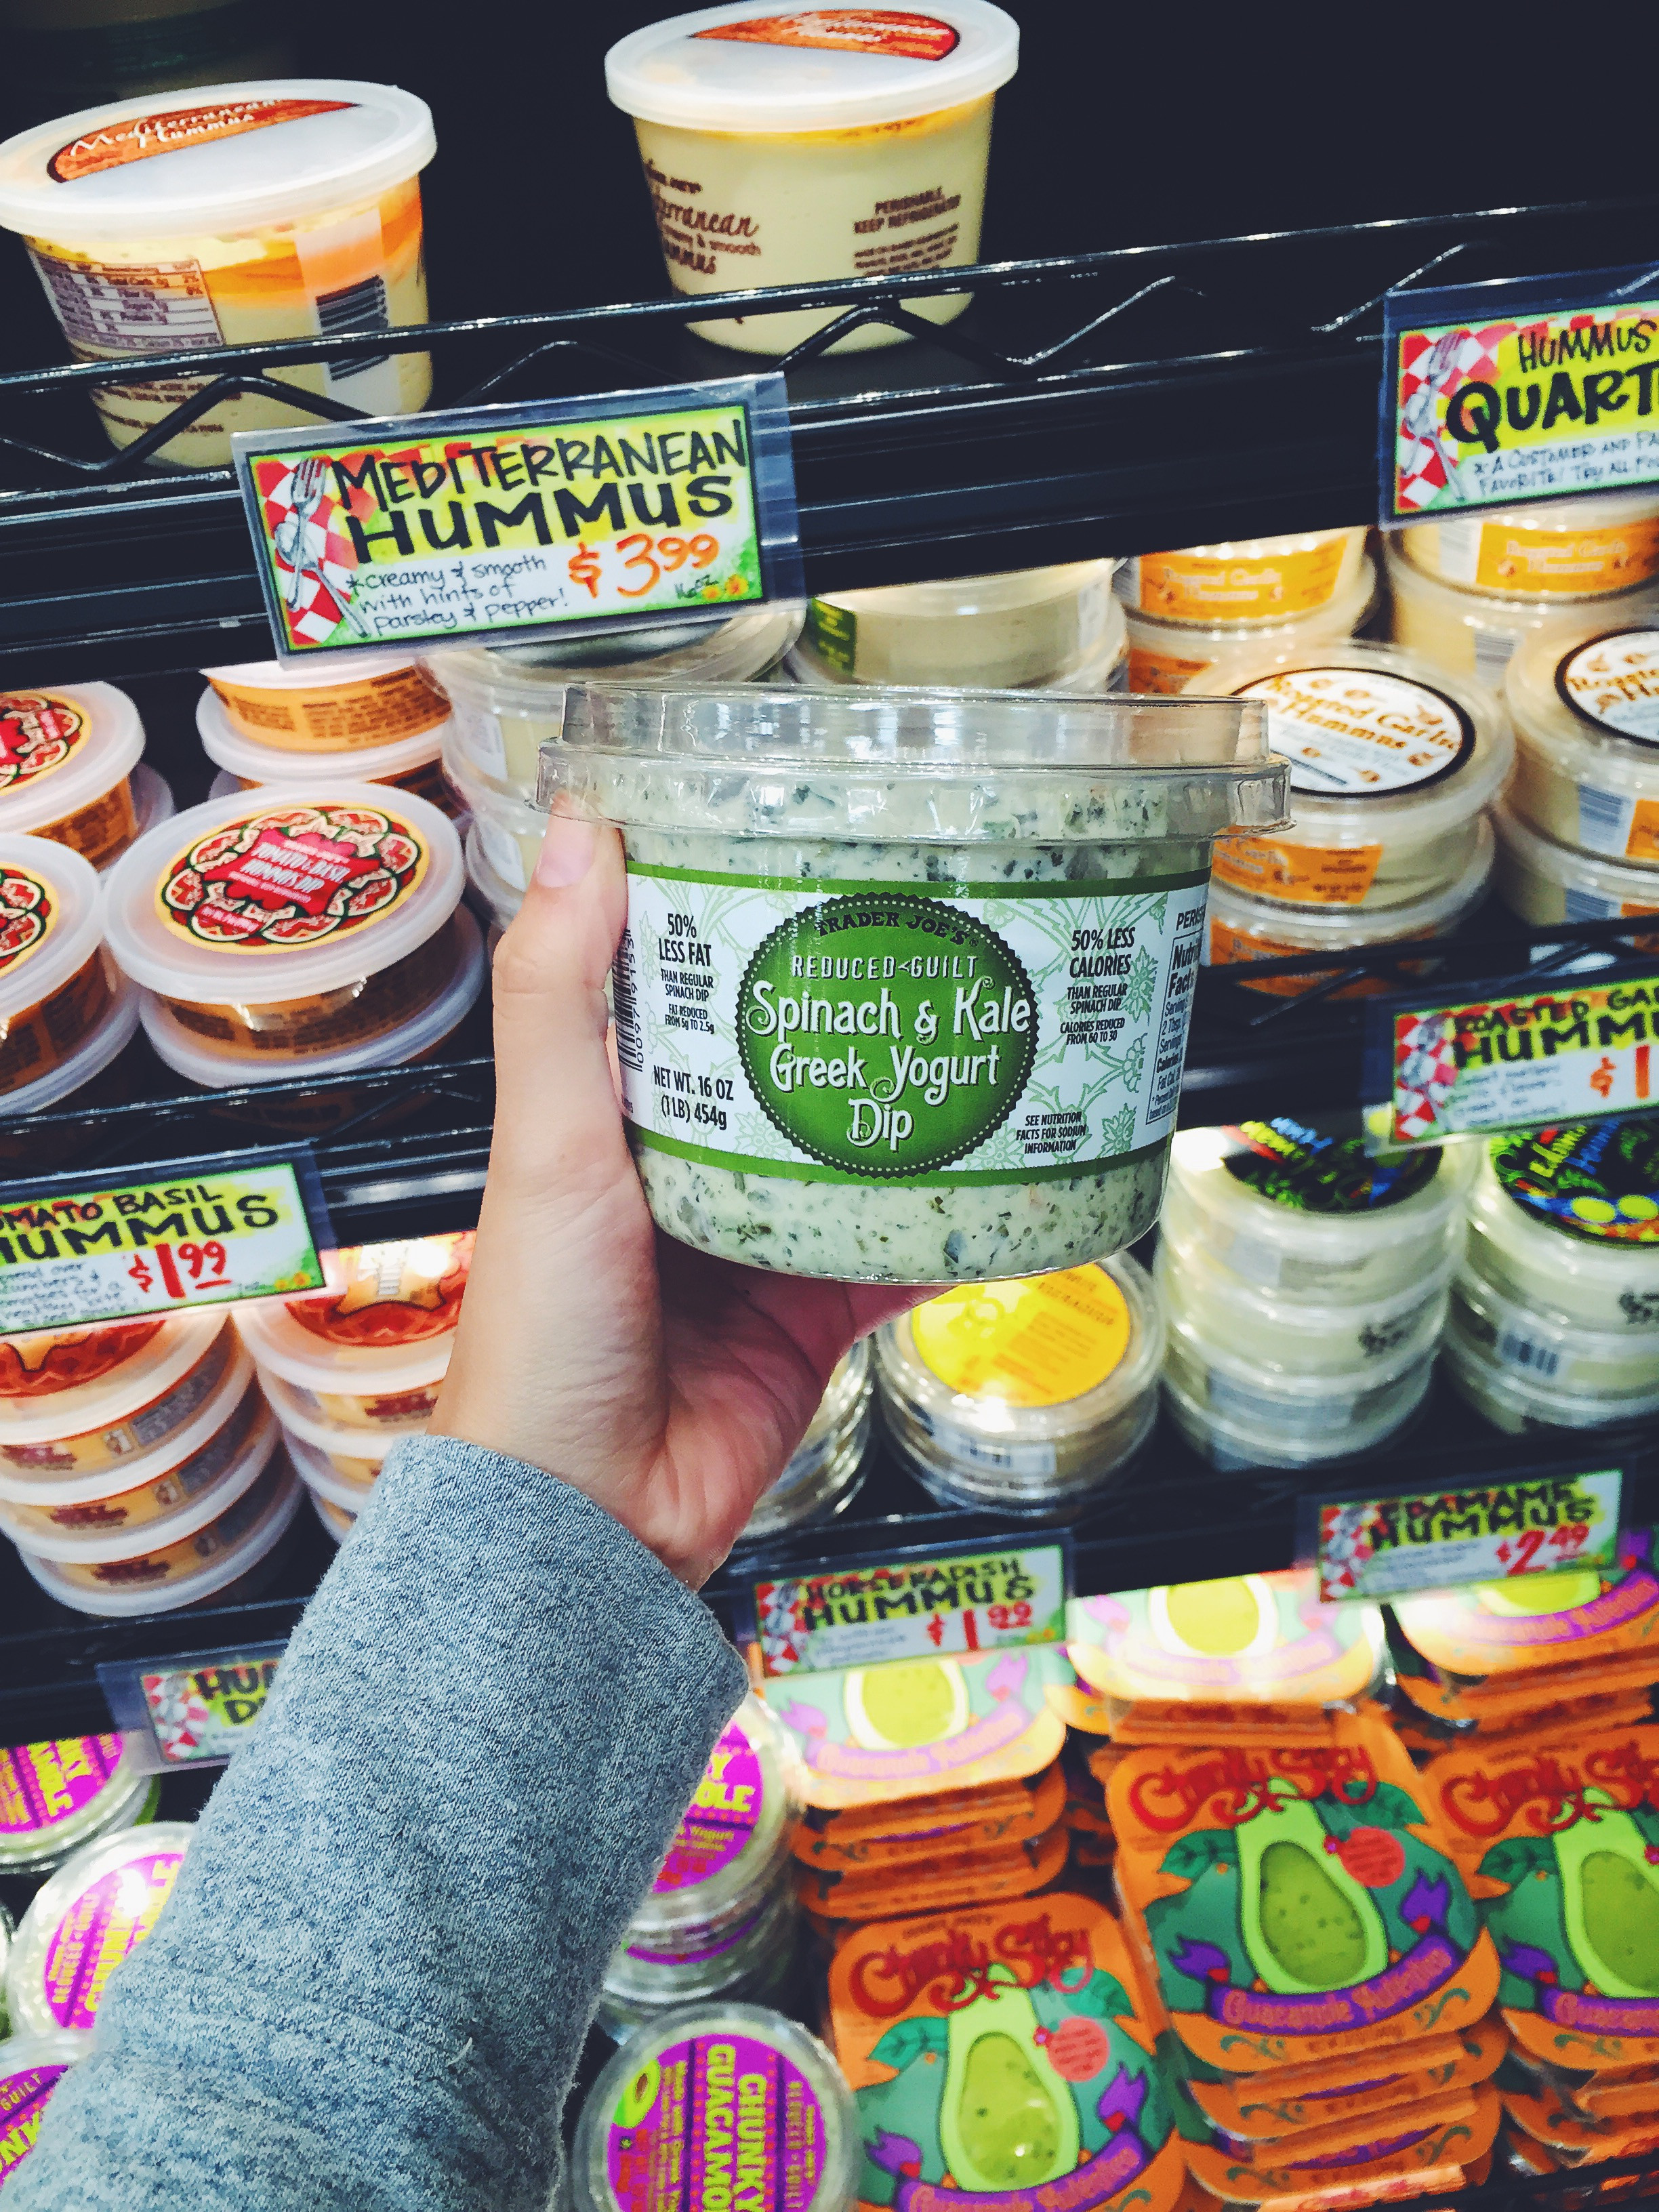 Healthy Snacks From Trader Joes
 Top 25 Finds at Trader Joe s Get Healthy U